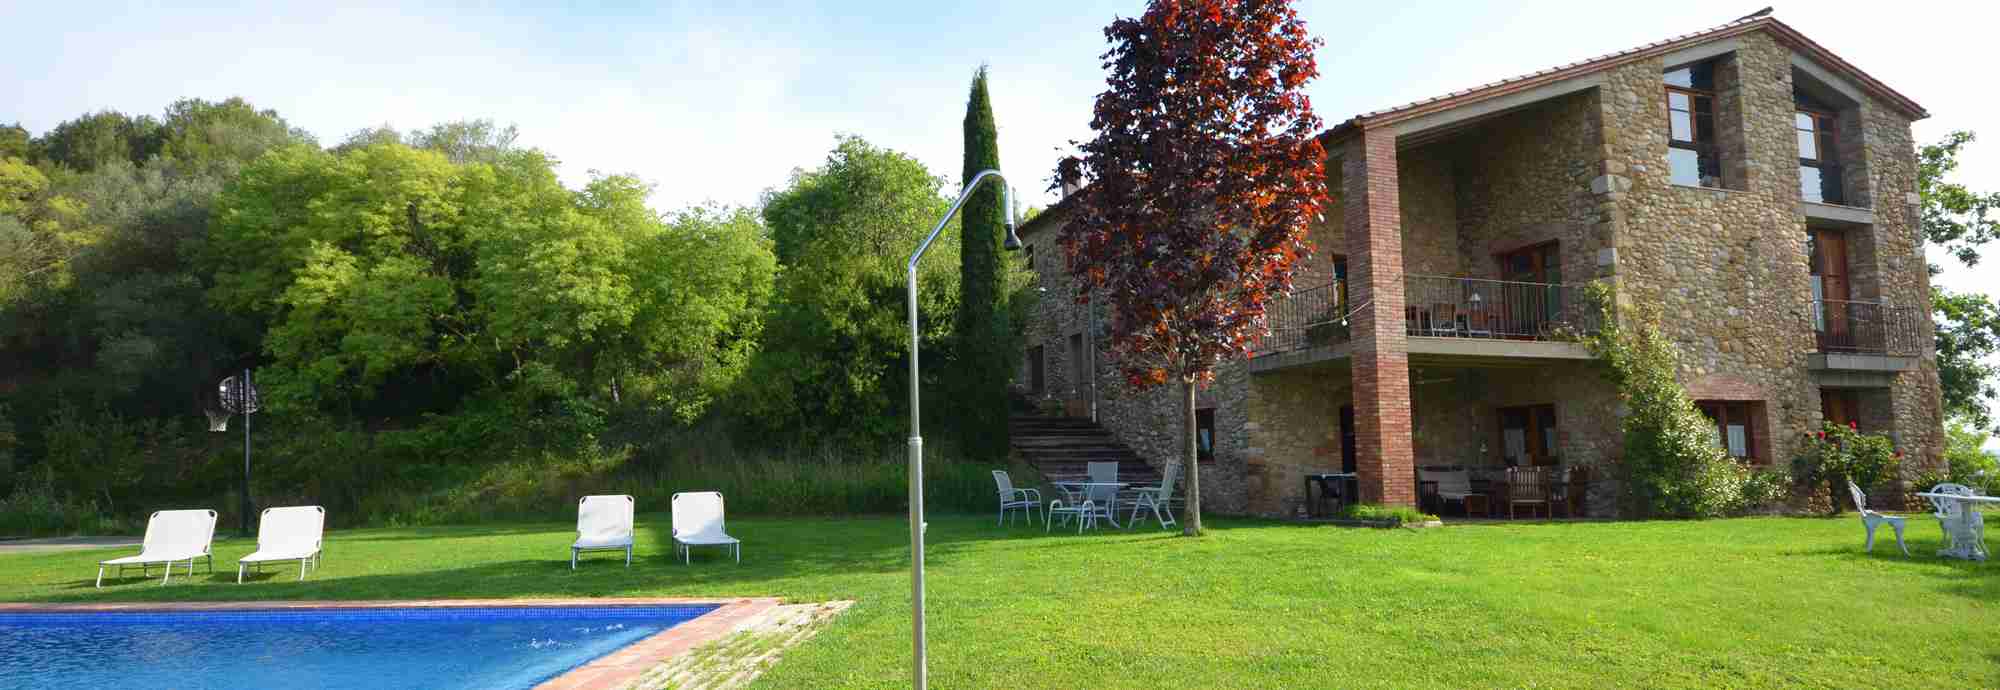 Artistic holiday villa with pool garden in ideal Catalonia location